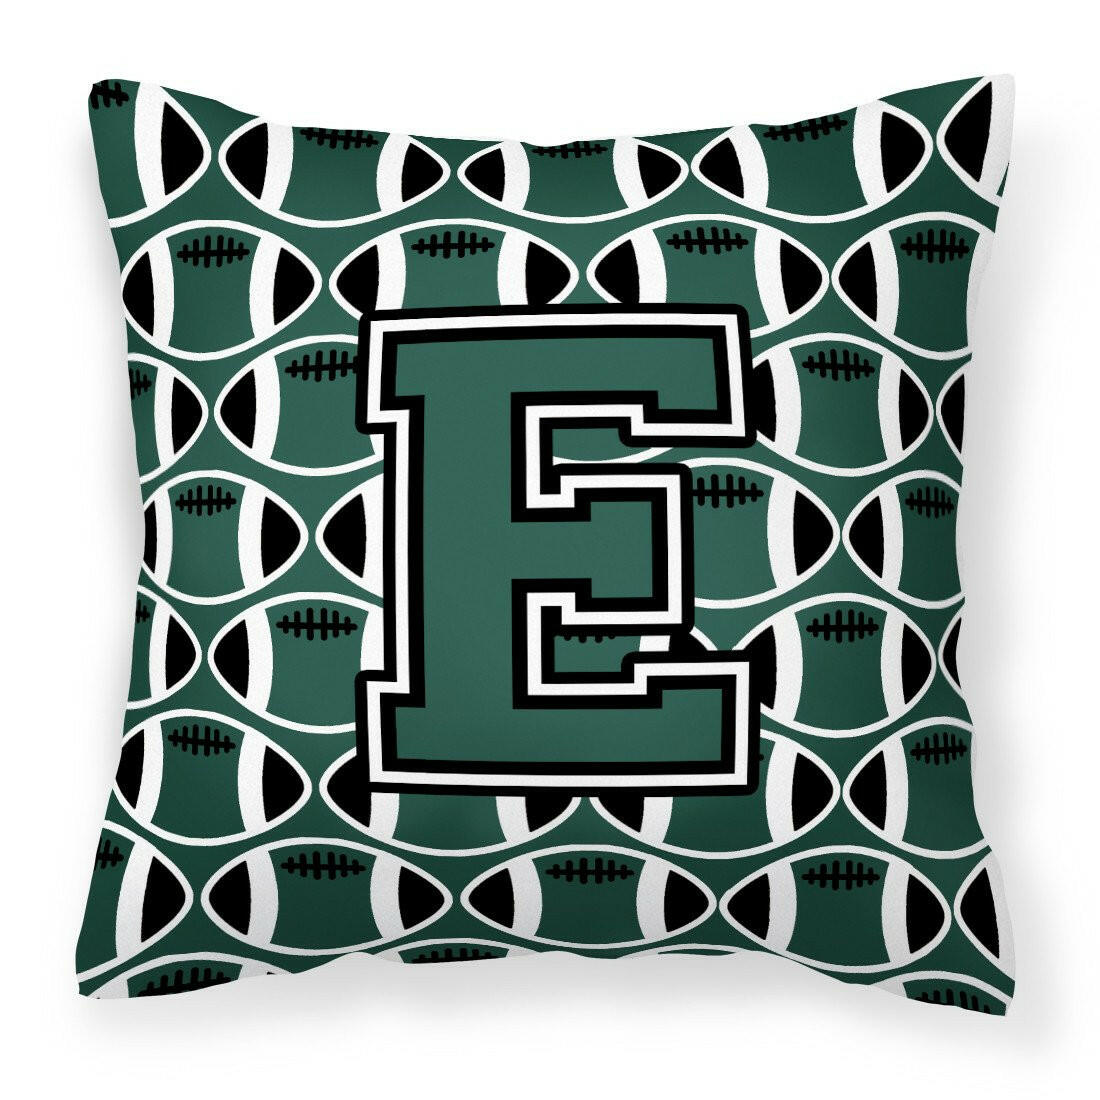 Letter E Football Green and White Fabric Decorative Pillow CJ1071-EPW1414 by Caroline's Treasures